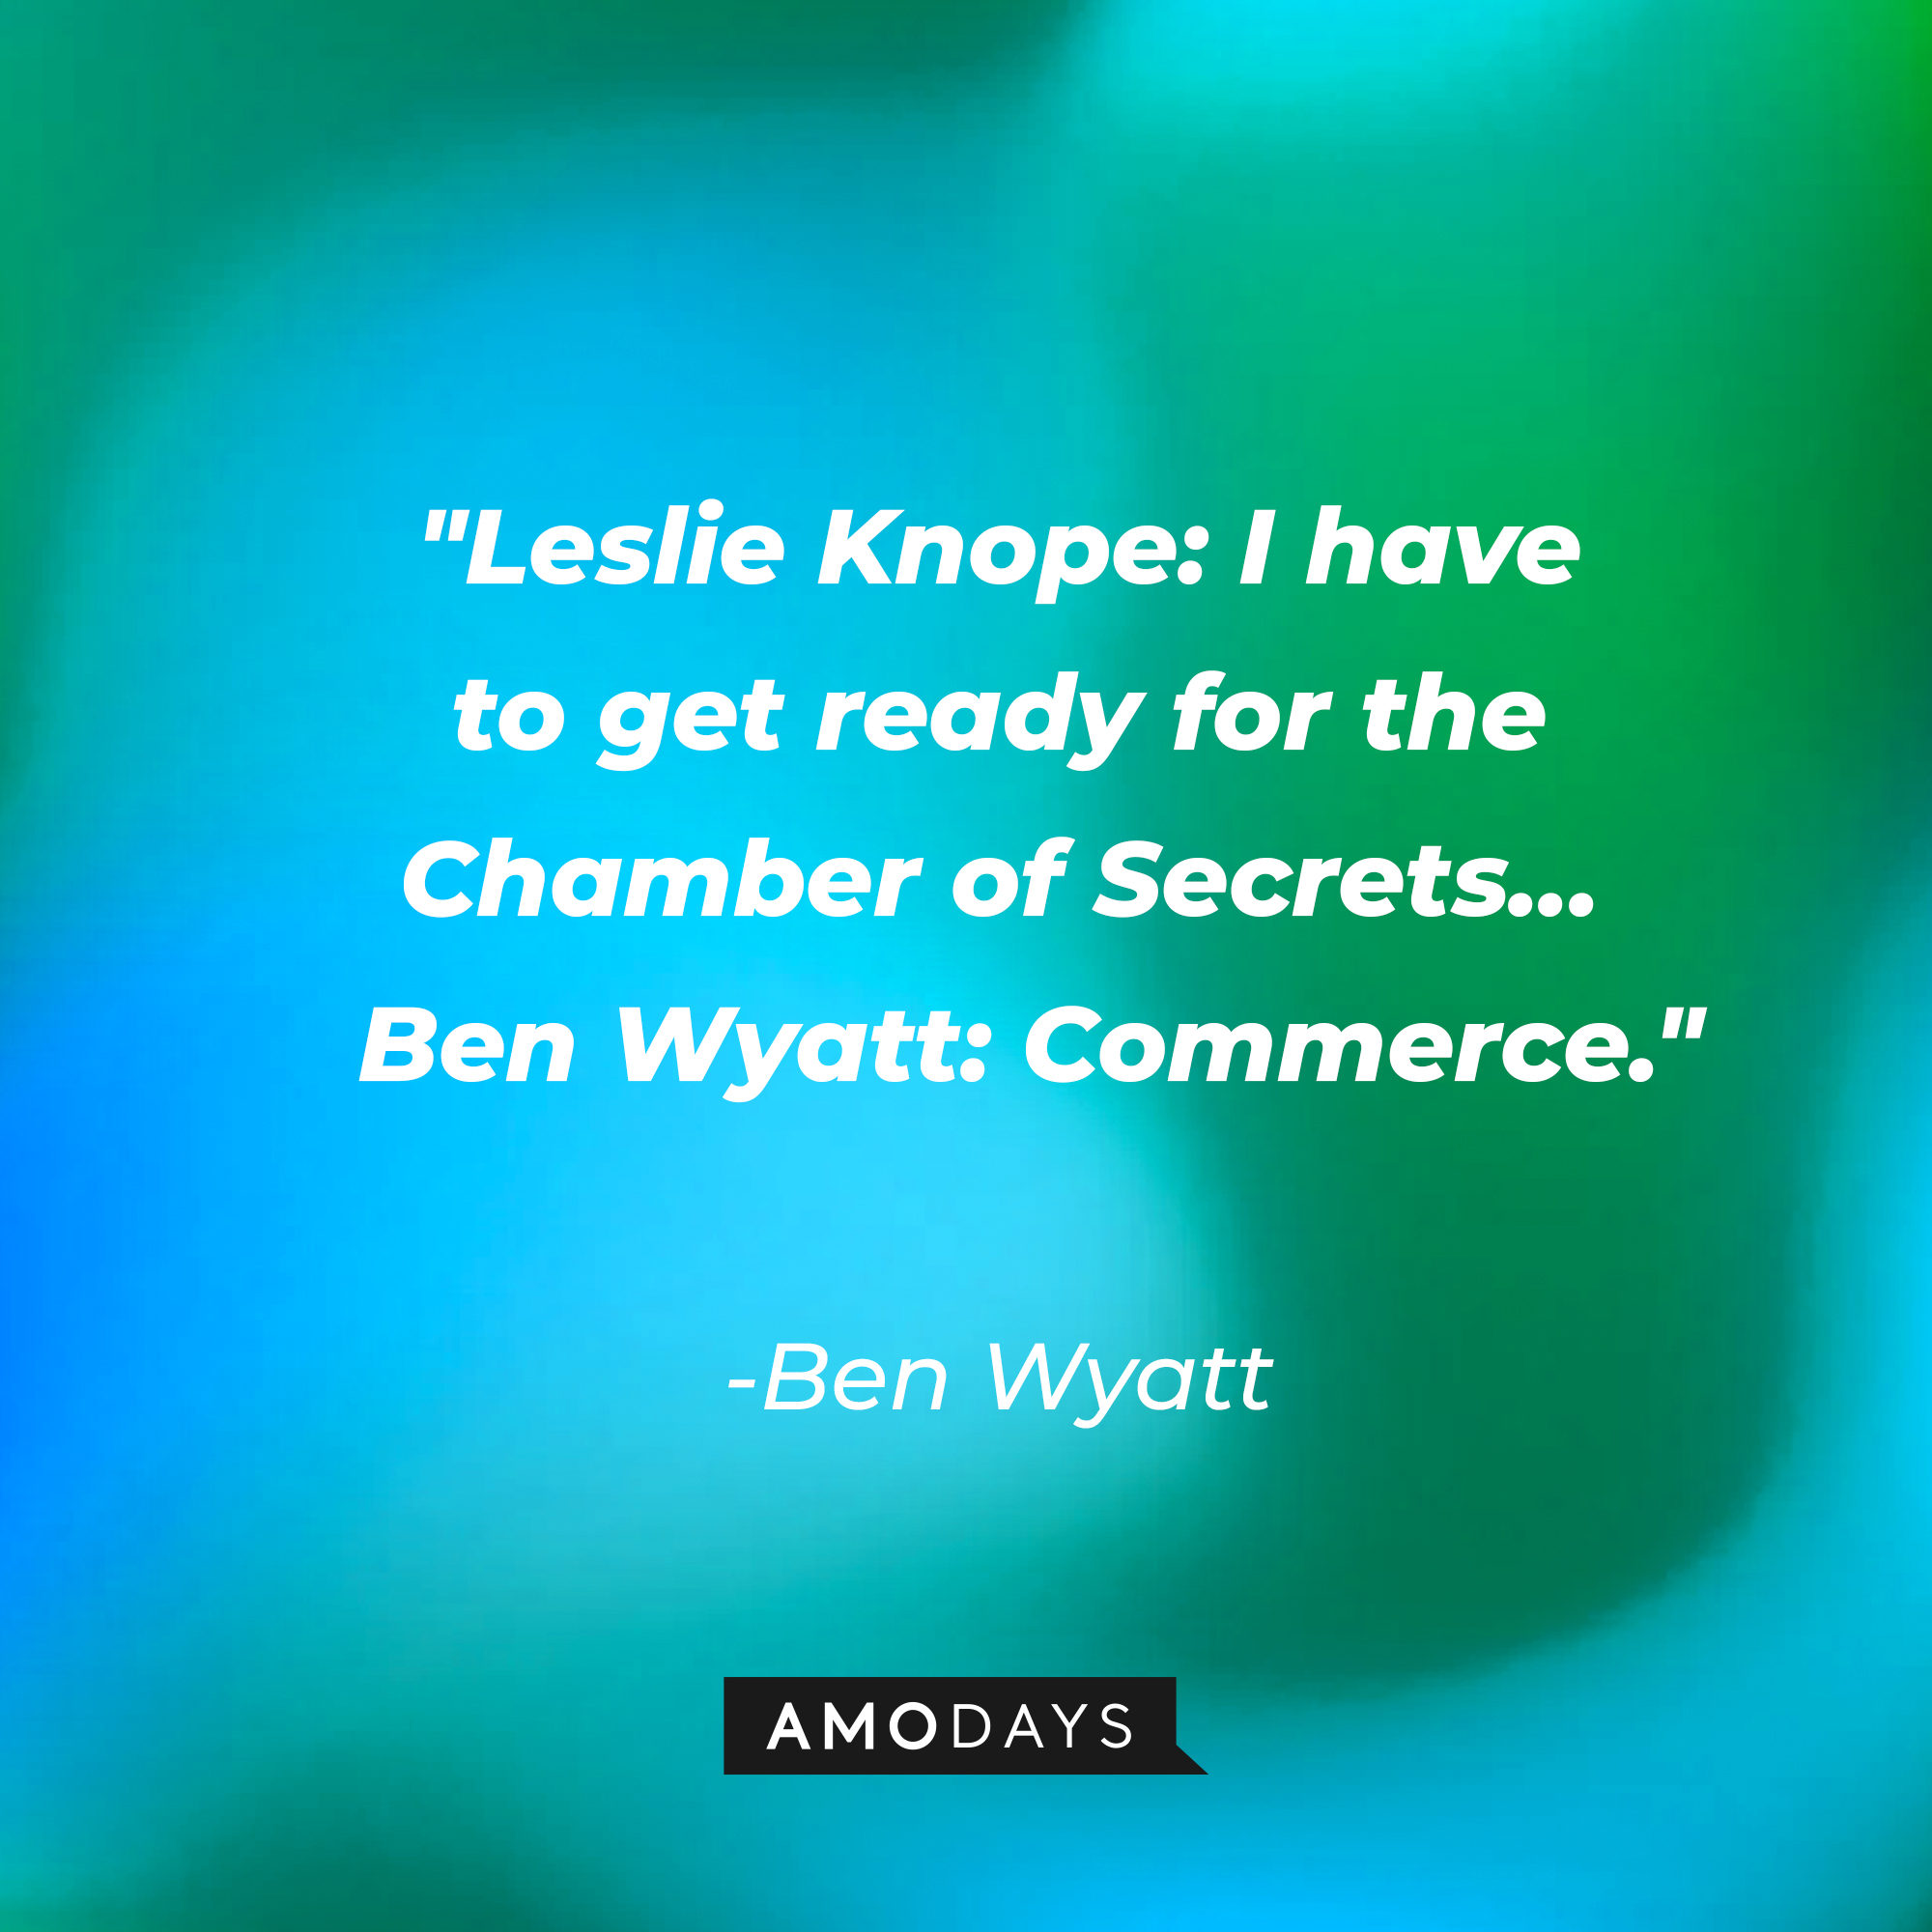 A quote from Ben and Leslie in the Parks and Recreation" series: "Leslie Knope: I have to get ready for the Chamber of Secrets… Ben Wyatt: Commerce." | Source: AmoDays